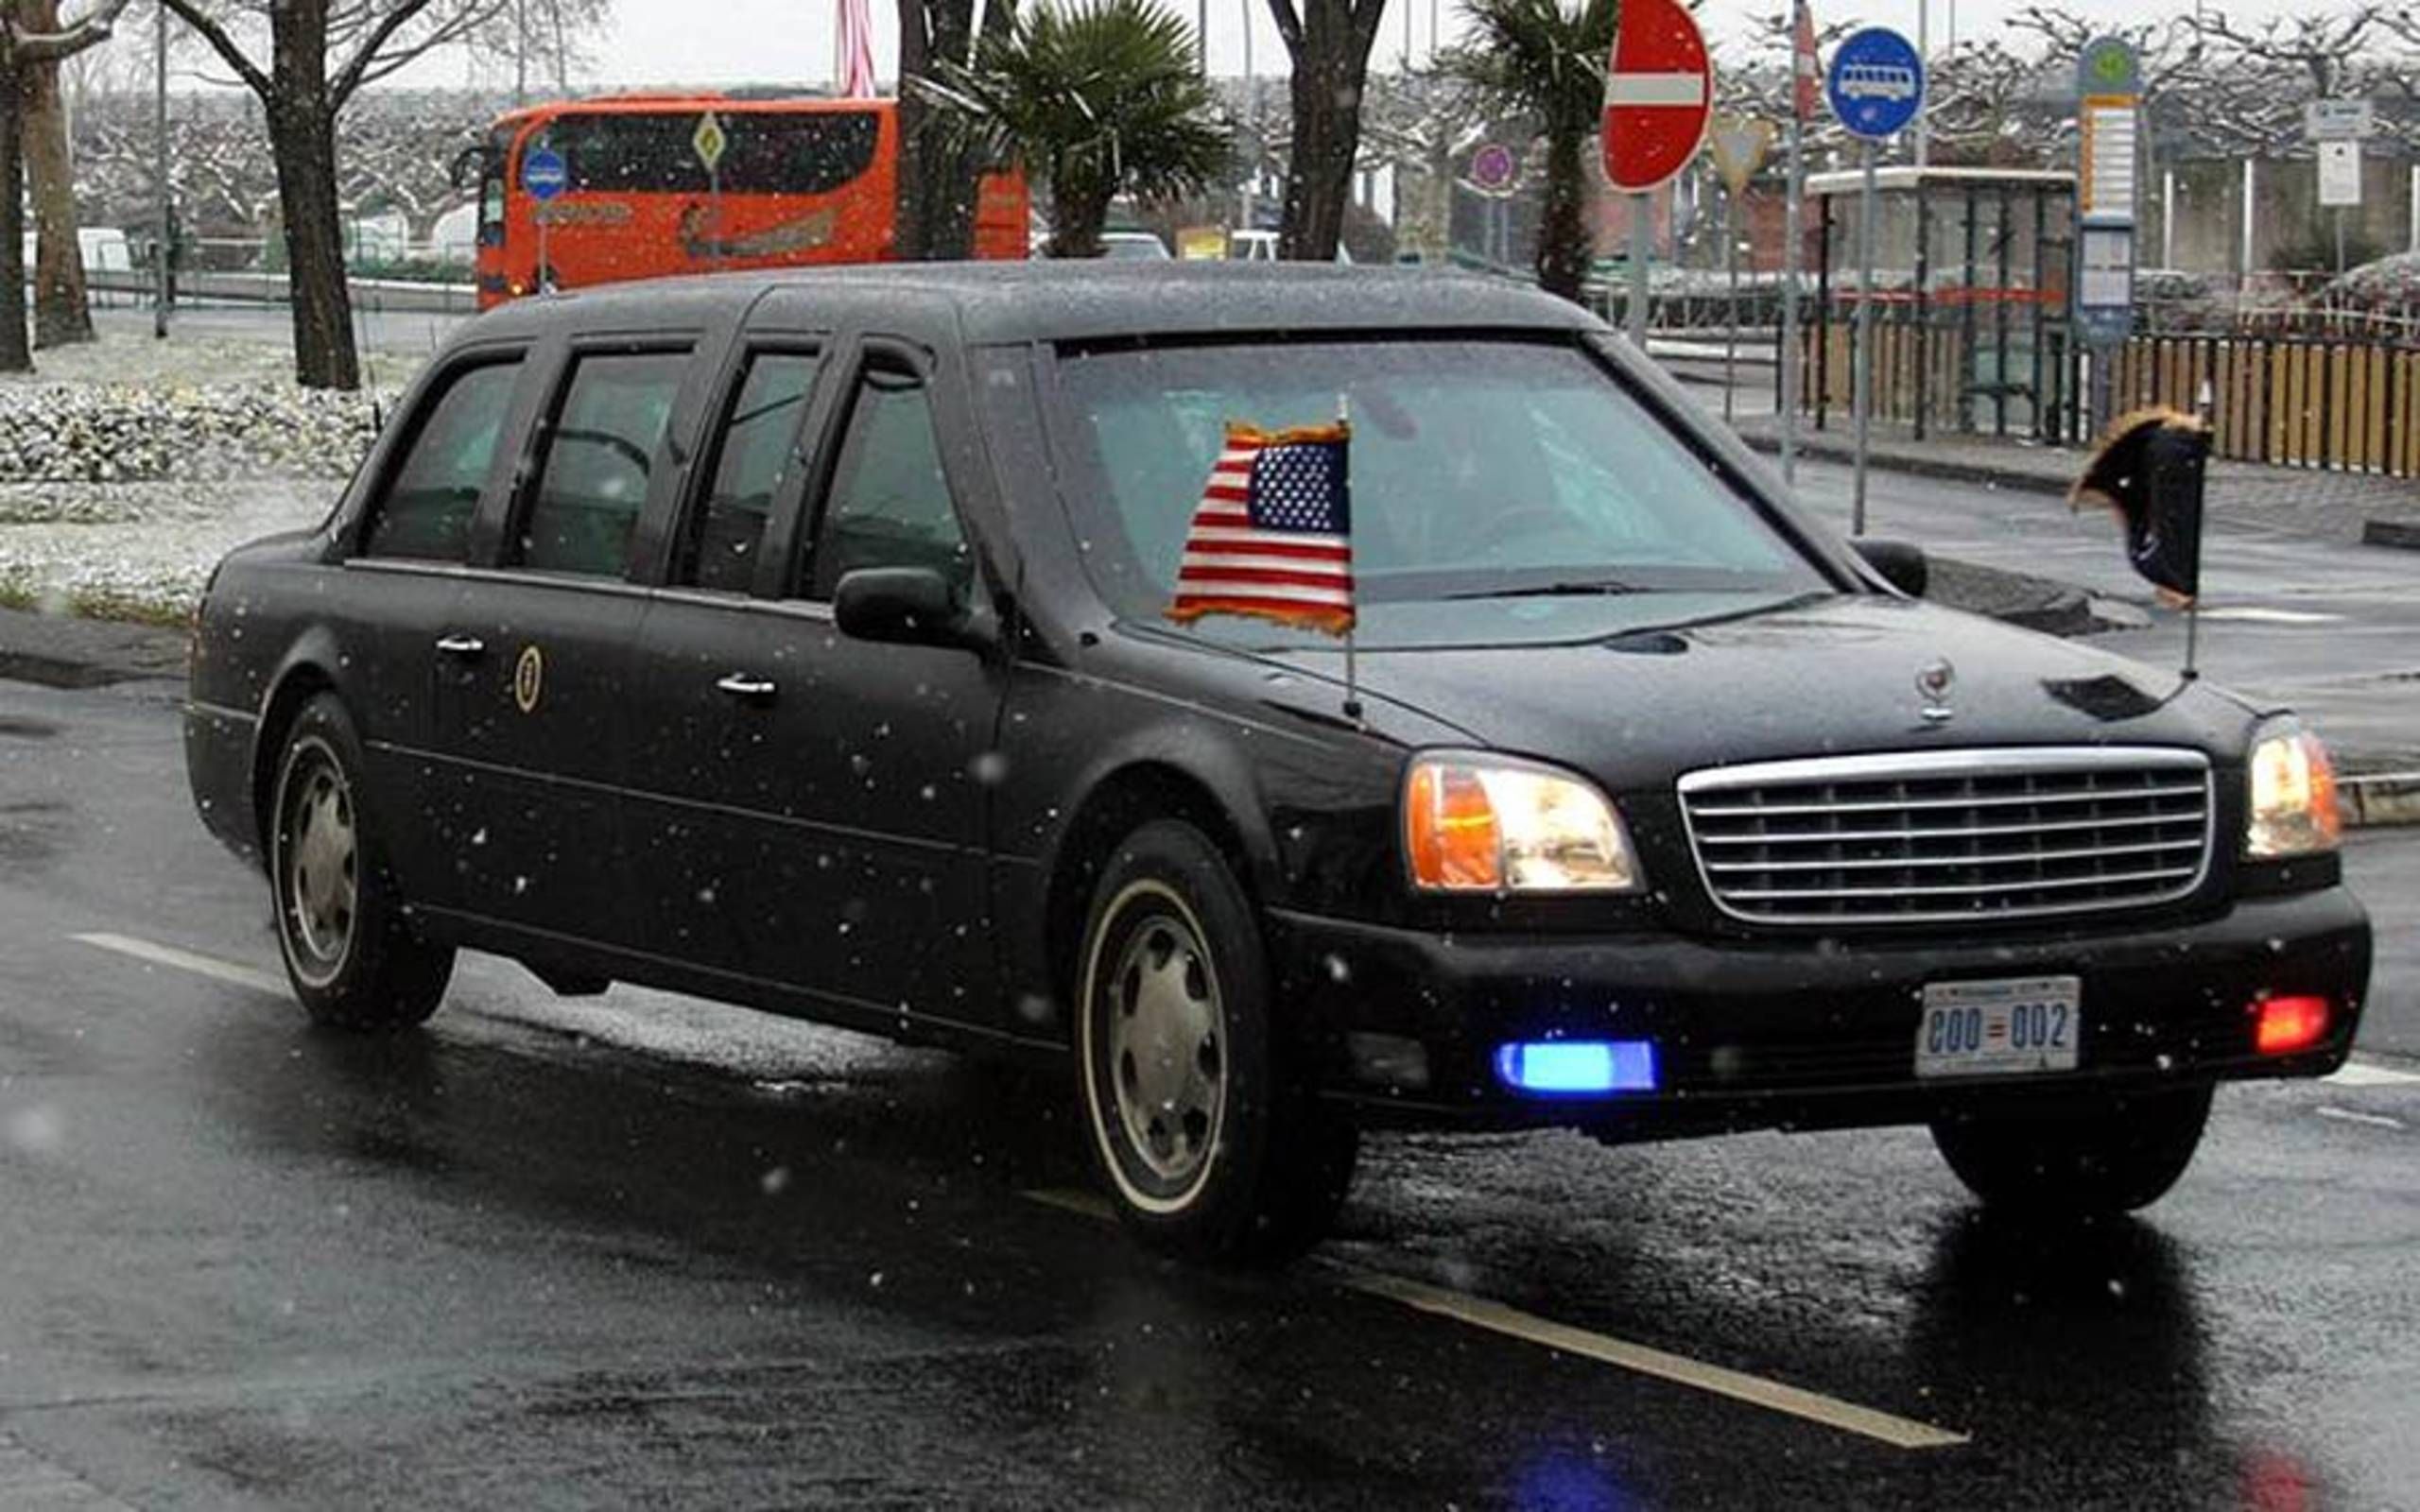 The next presidential limousine might look like this